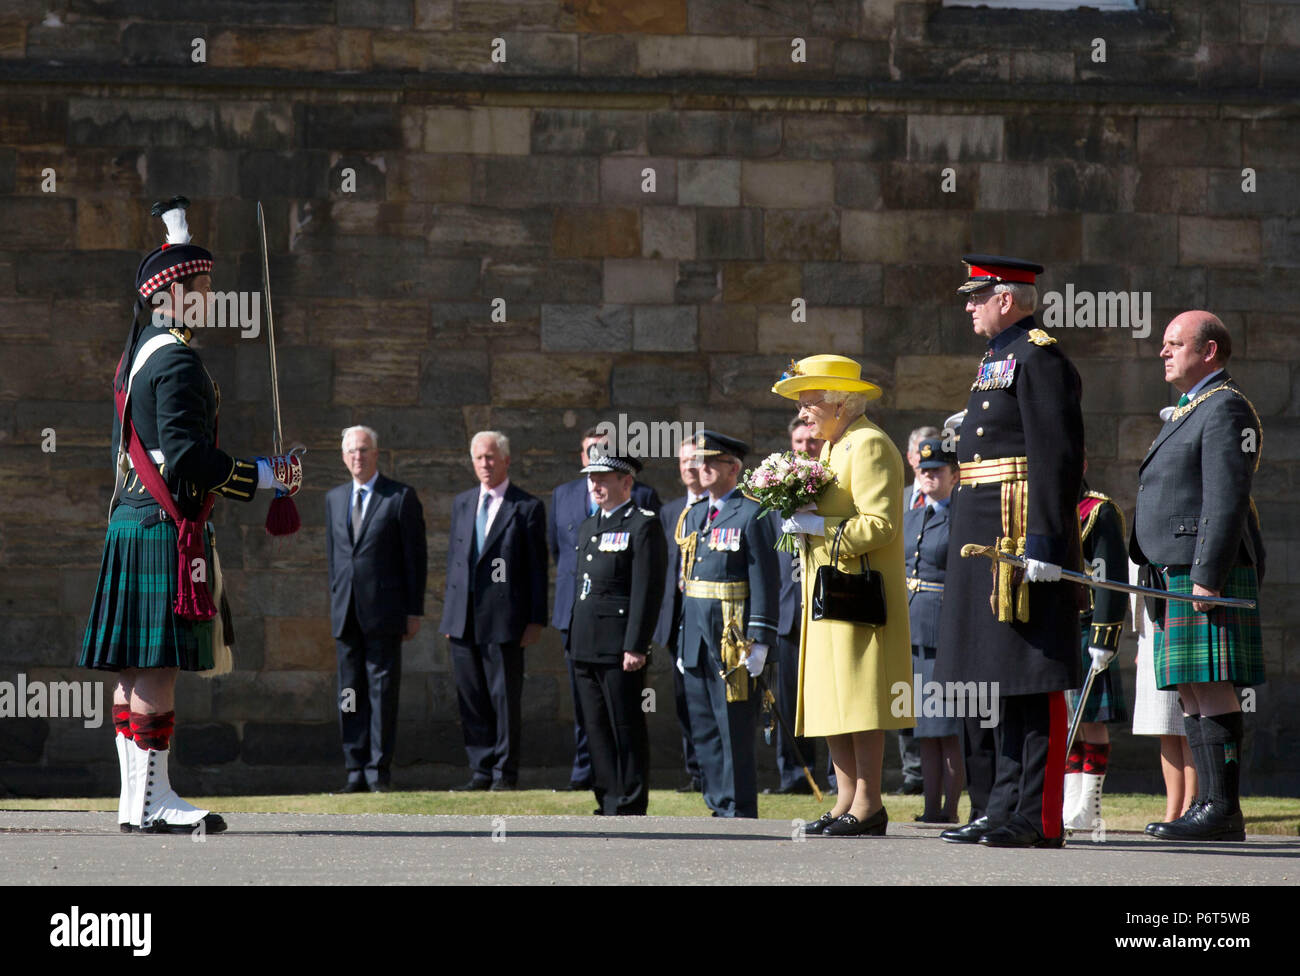 Queen Elizabeth II receives the keys from Edinburgh's Lord Provost Frank Ross during the Ceremony of the Keys at the Palace of Holyroodhouse in Edinburgh. Stock Photo